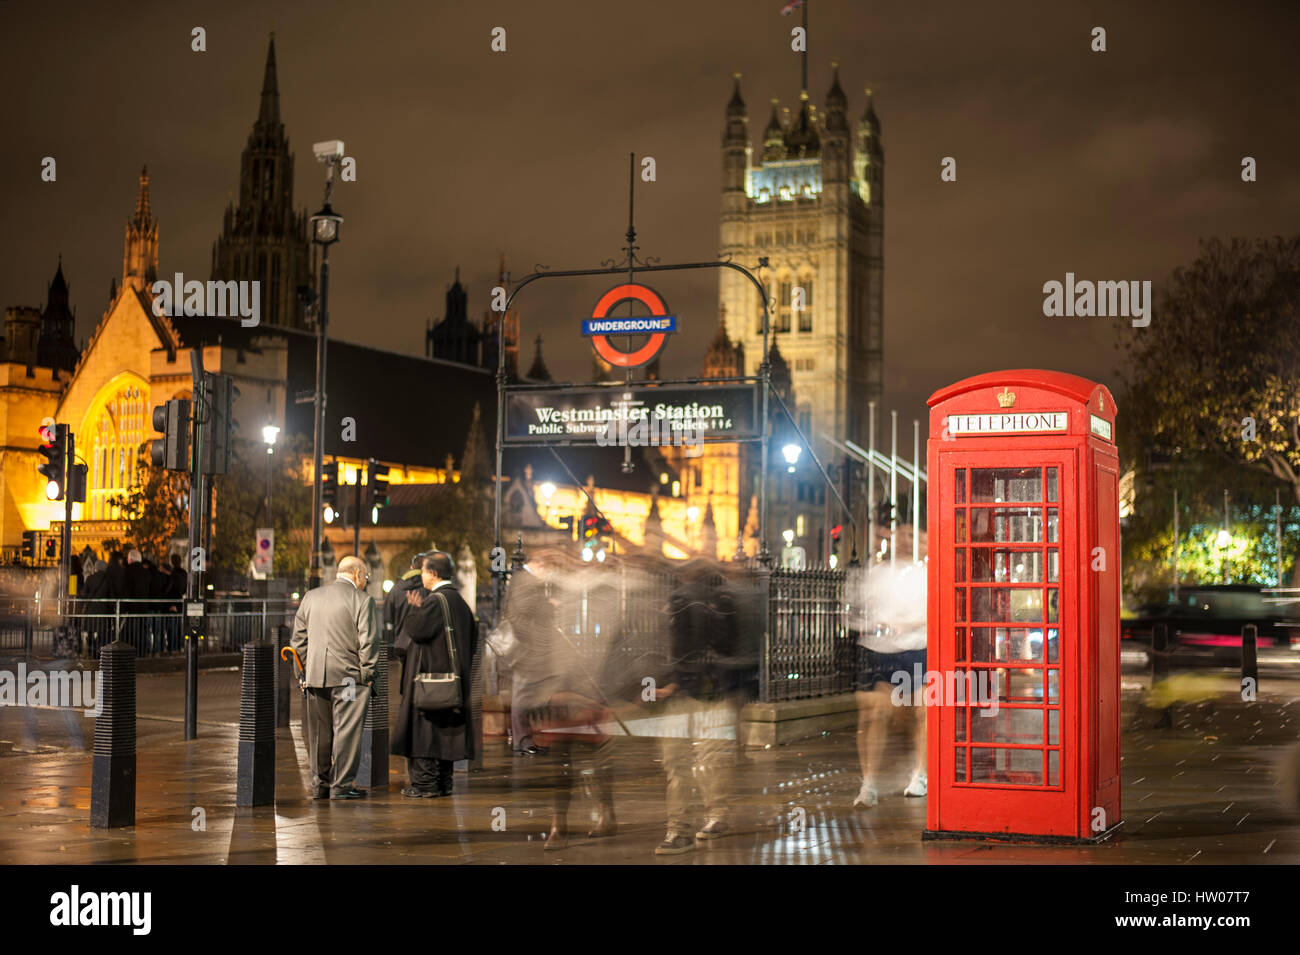 People walking and talking at night near the Westminster underground and the red telephone box in London - UK Stock Photo